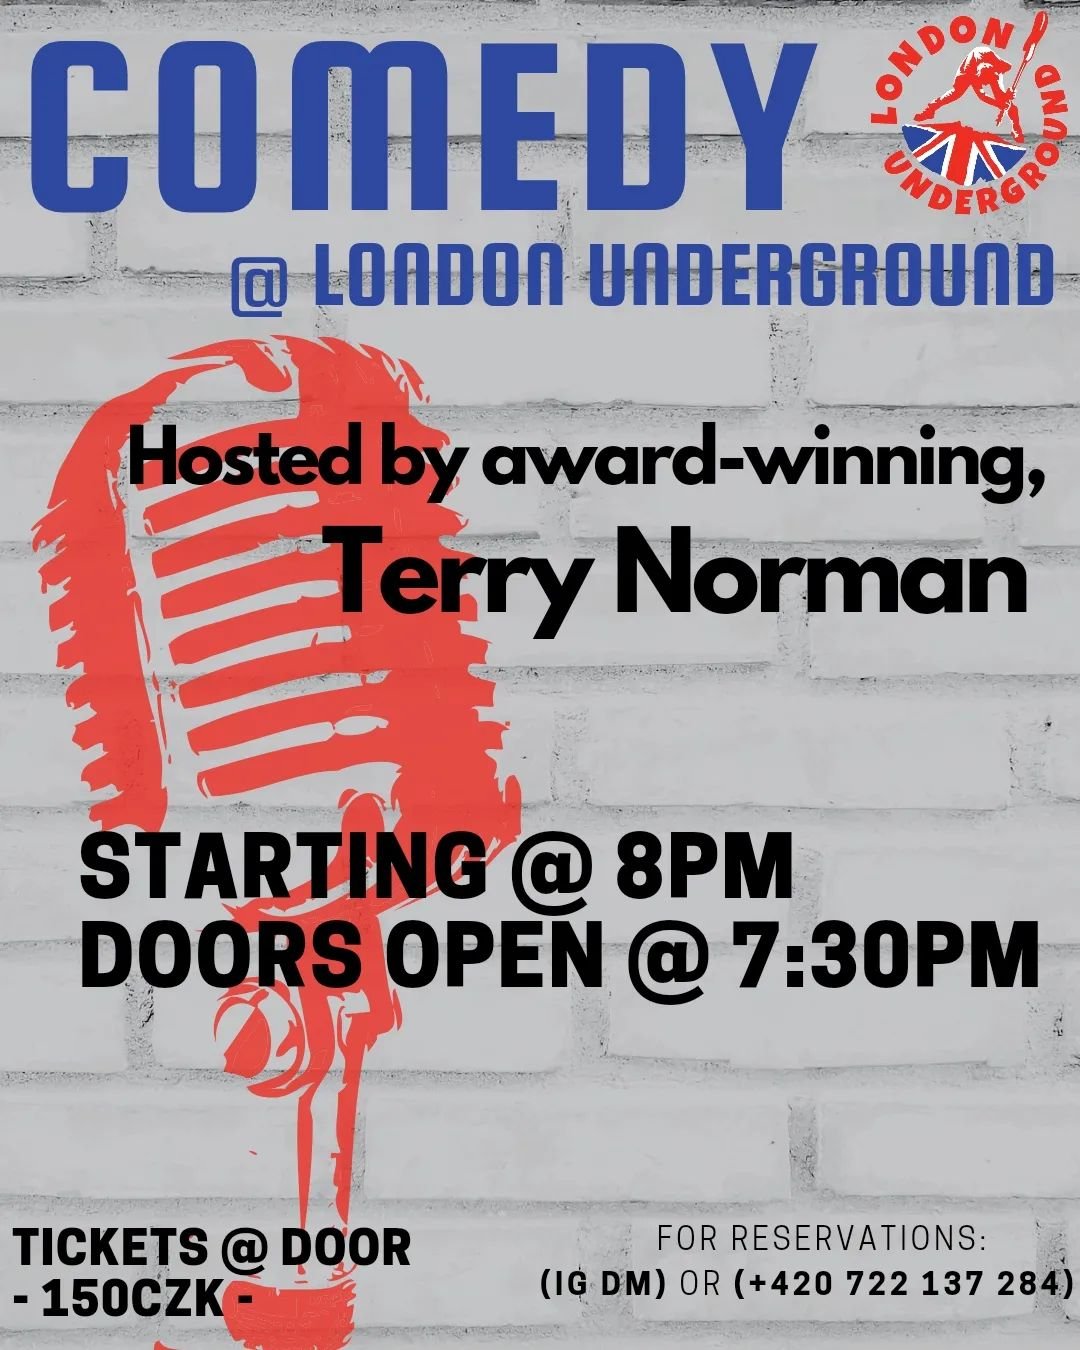 We're revamping comedy at London Underground and it all begins this Friday! Join us for the first show of a new era, featuring some of the best comedians from Prague and further afield, all hosted by our resident MC, the award-winning Terry Norman. ?